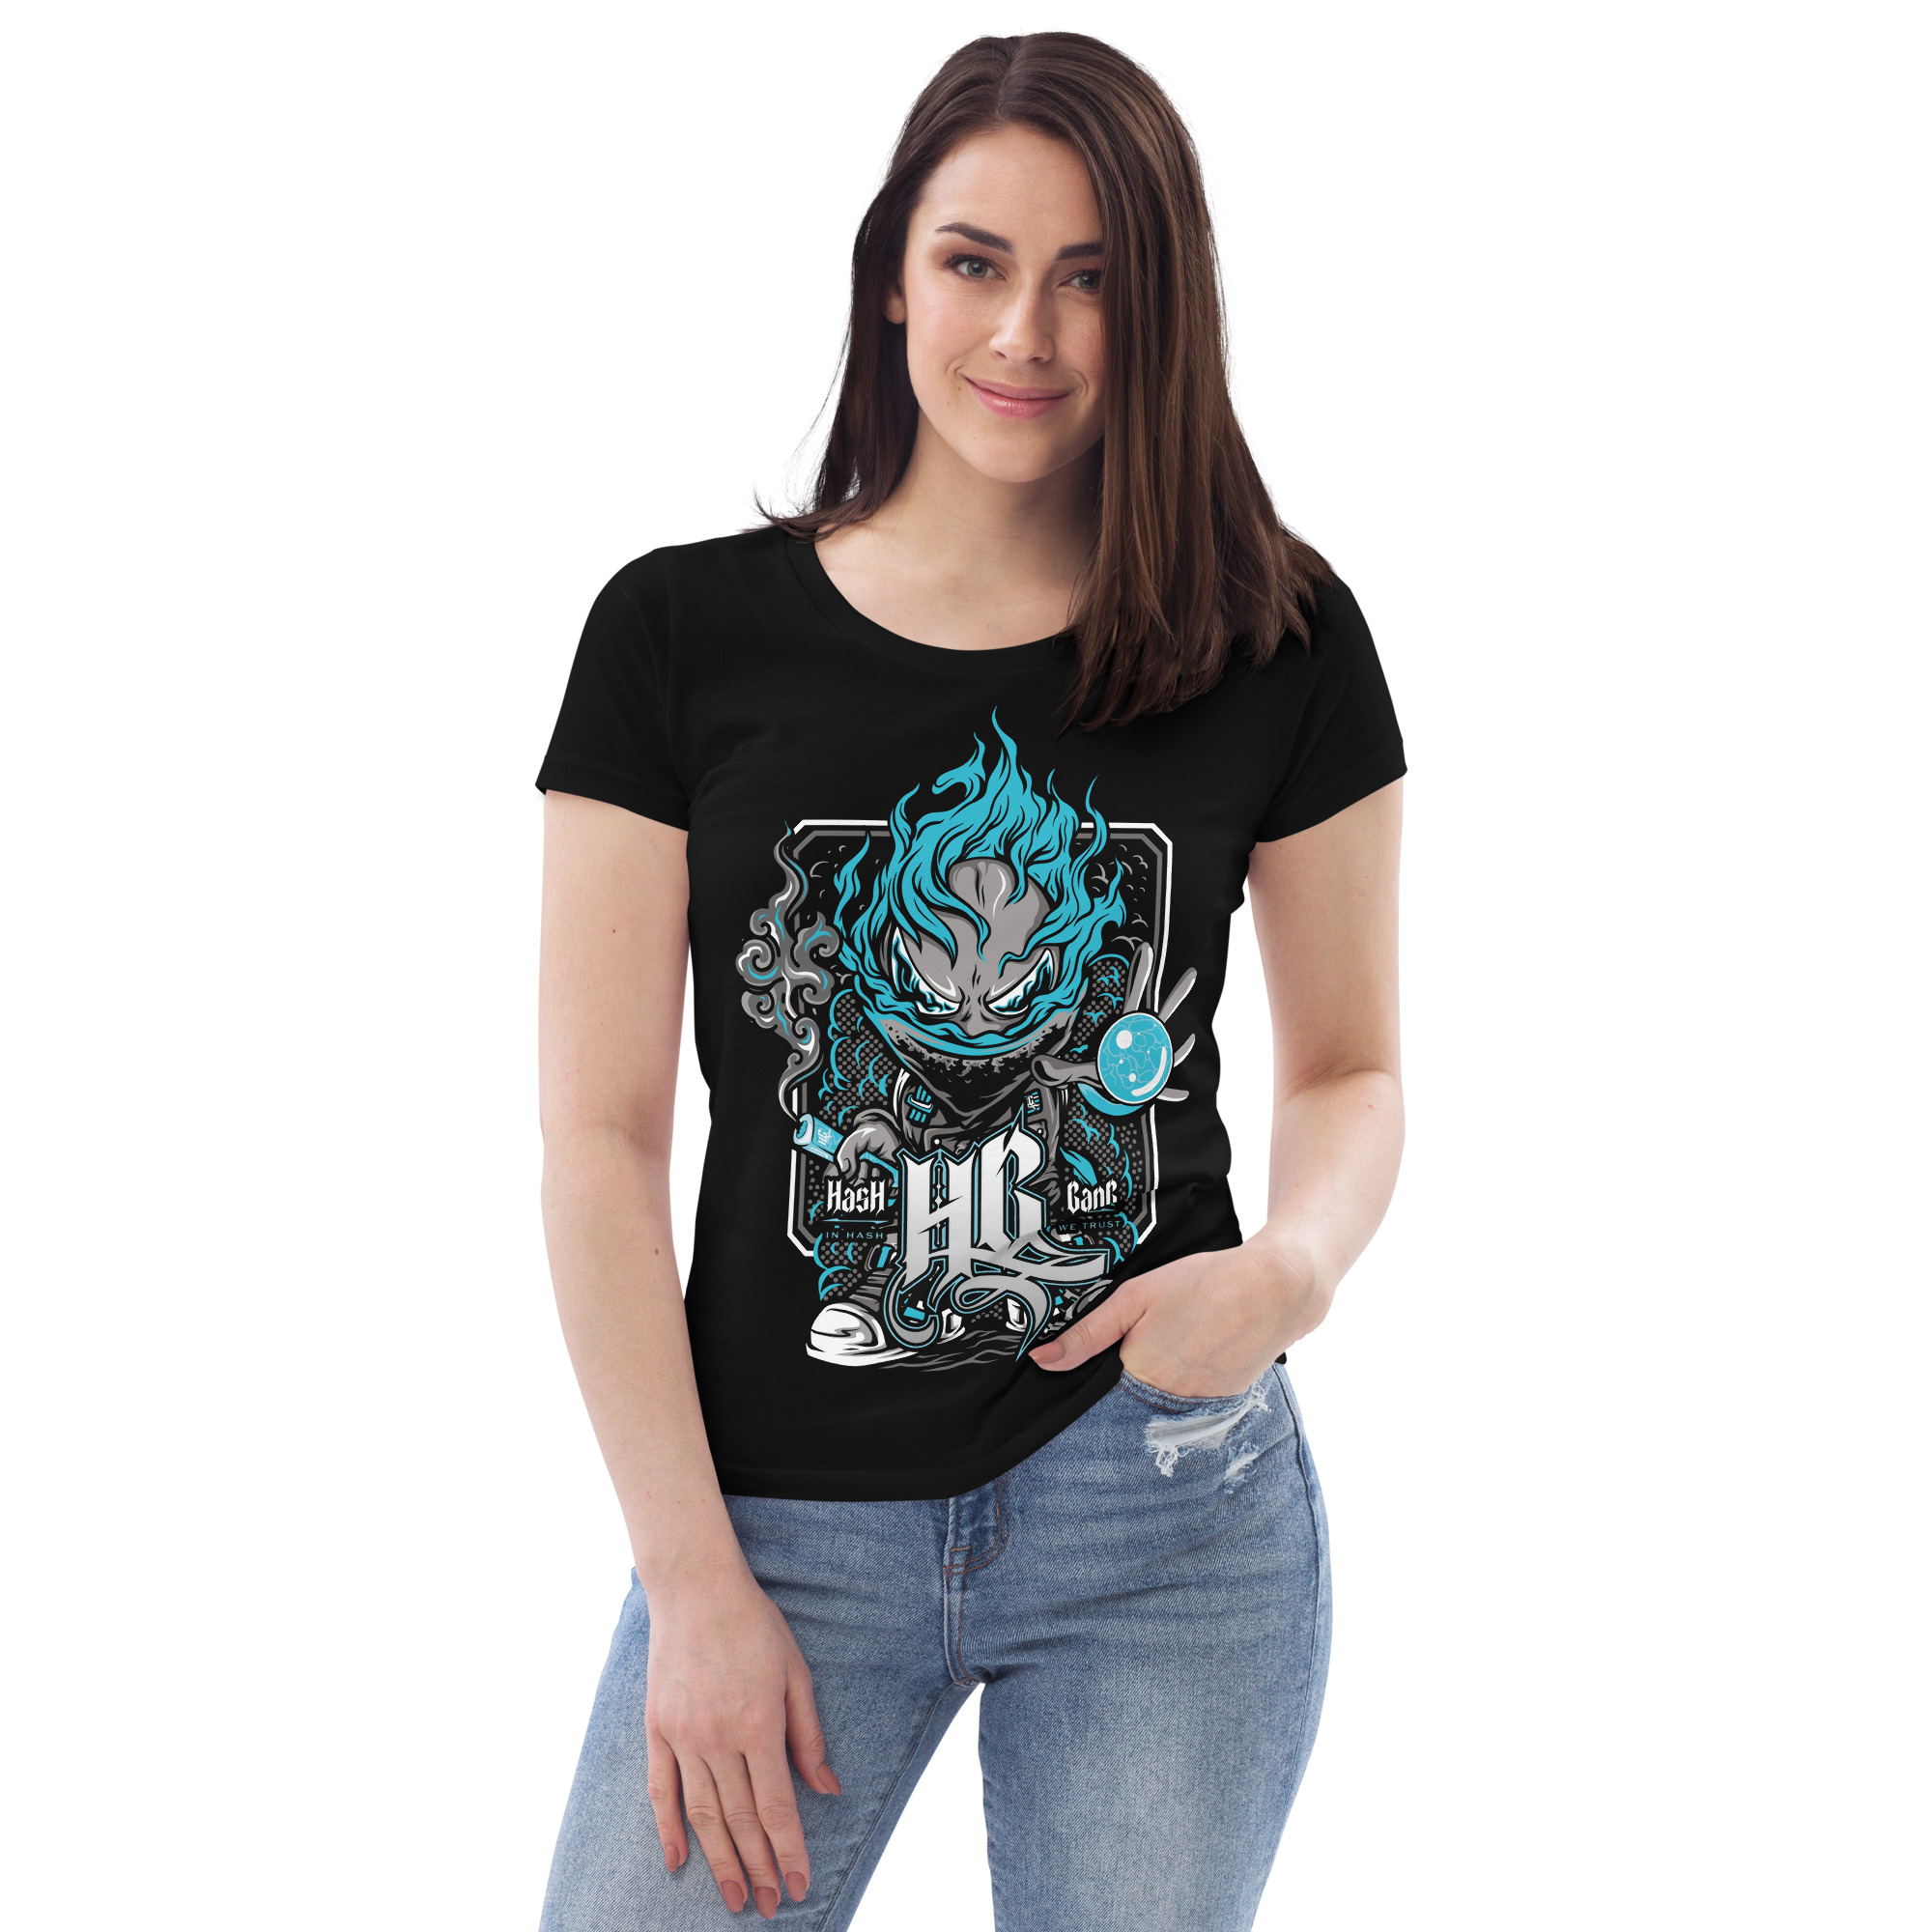 womens-fitted-eco-tee-black-front-65a788e682bf4.jpg